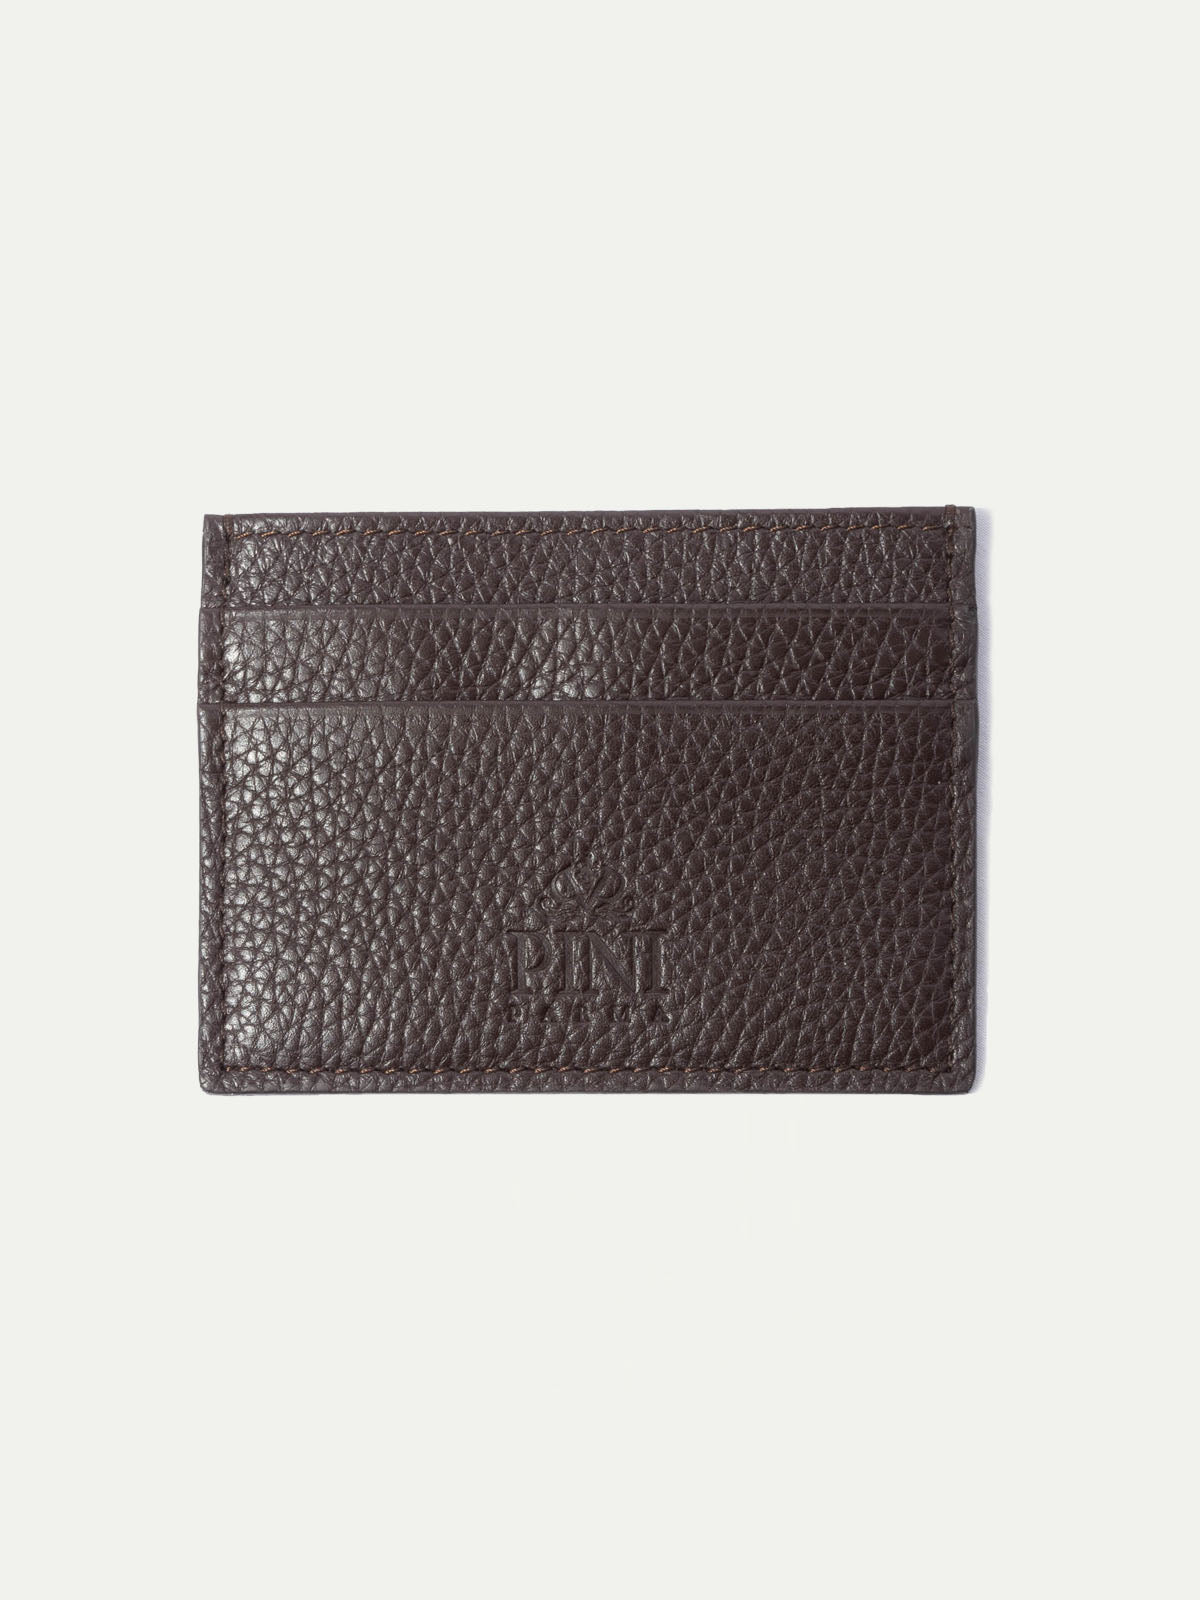 calf leather card holder, calf leather cardholder, brown card holder, brown cardholder, men leather card holder, men leather cardholder, porte-cartes en cuir, porte-cartes marron, porte-cartes marron en cuir, porte-cartes Italien, Italian leather cardholder, Italian leather card holder